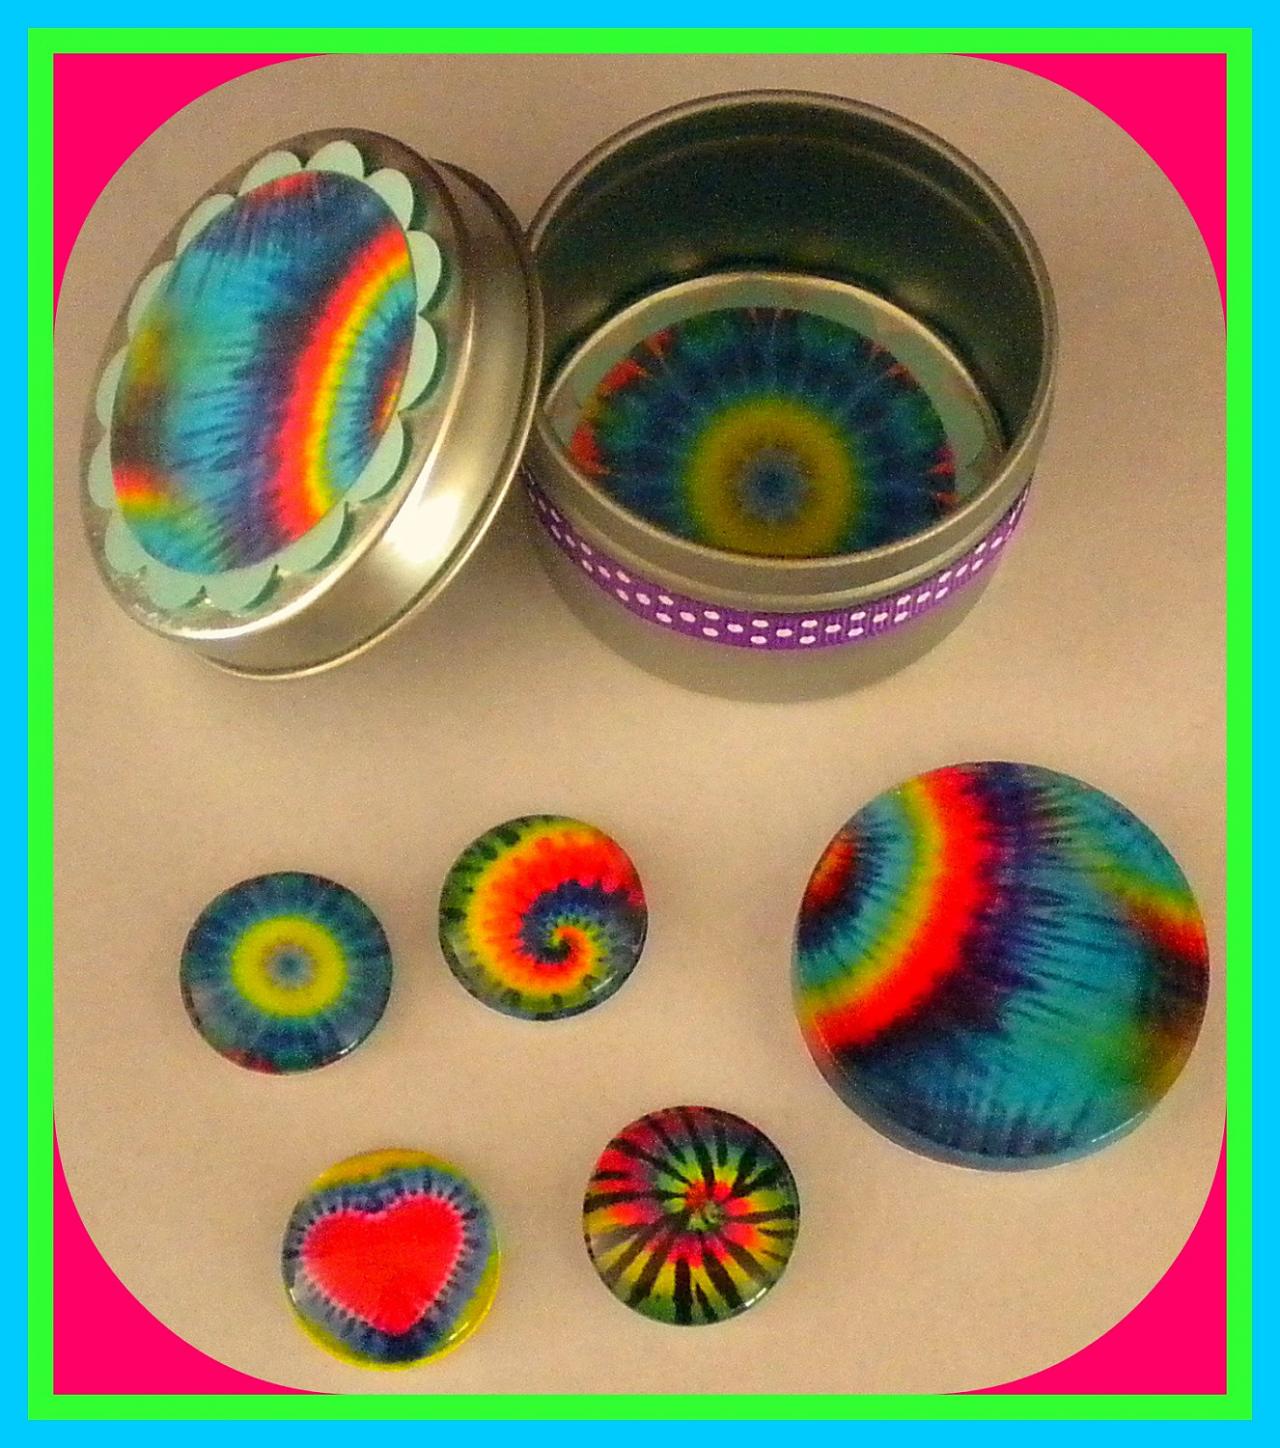 - Magnets - Tie Dye - Magnet Set In Gift Tin - 5 Magnets - Last One - Save 20%